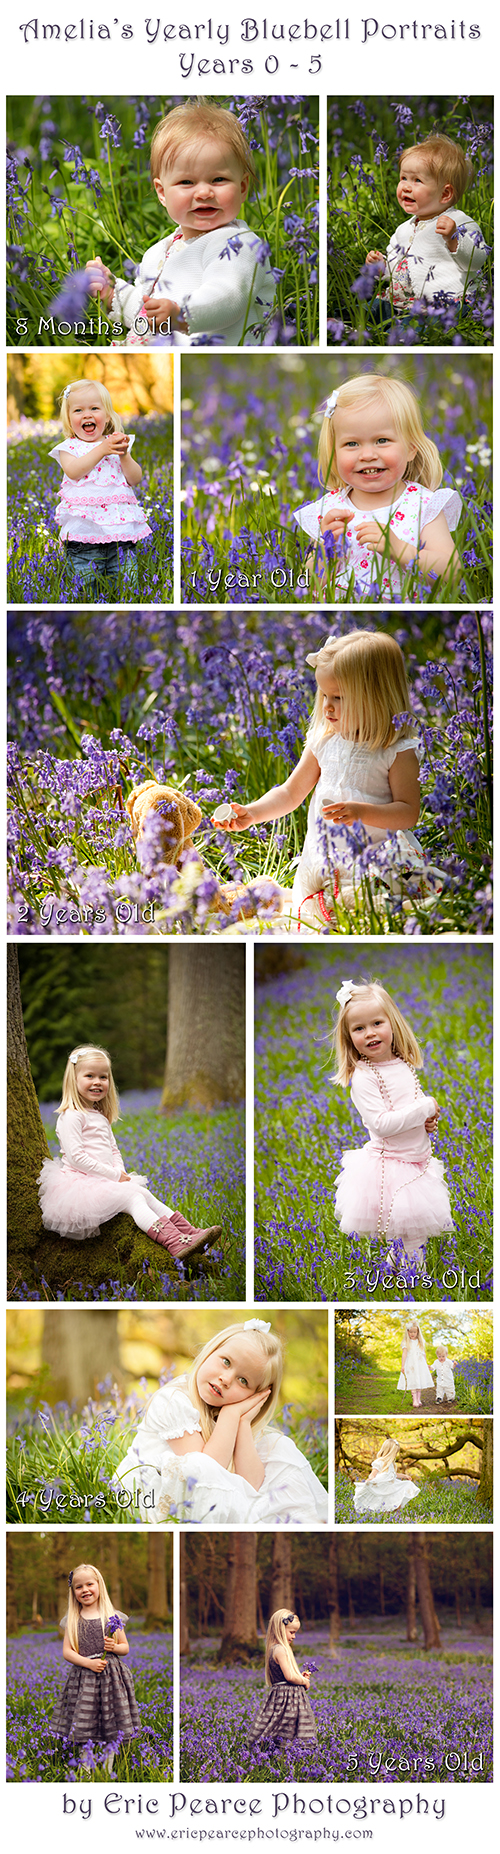 Little Girl in the English Bluebells 6 years in a row.